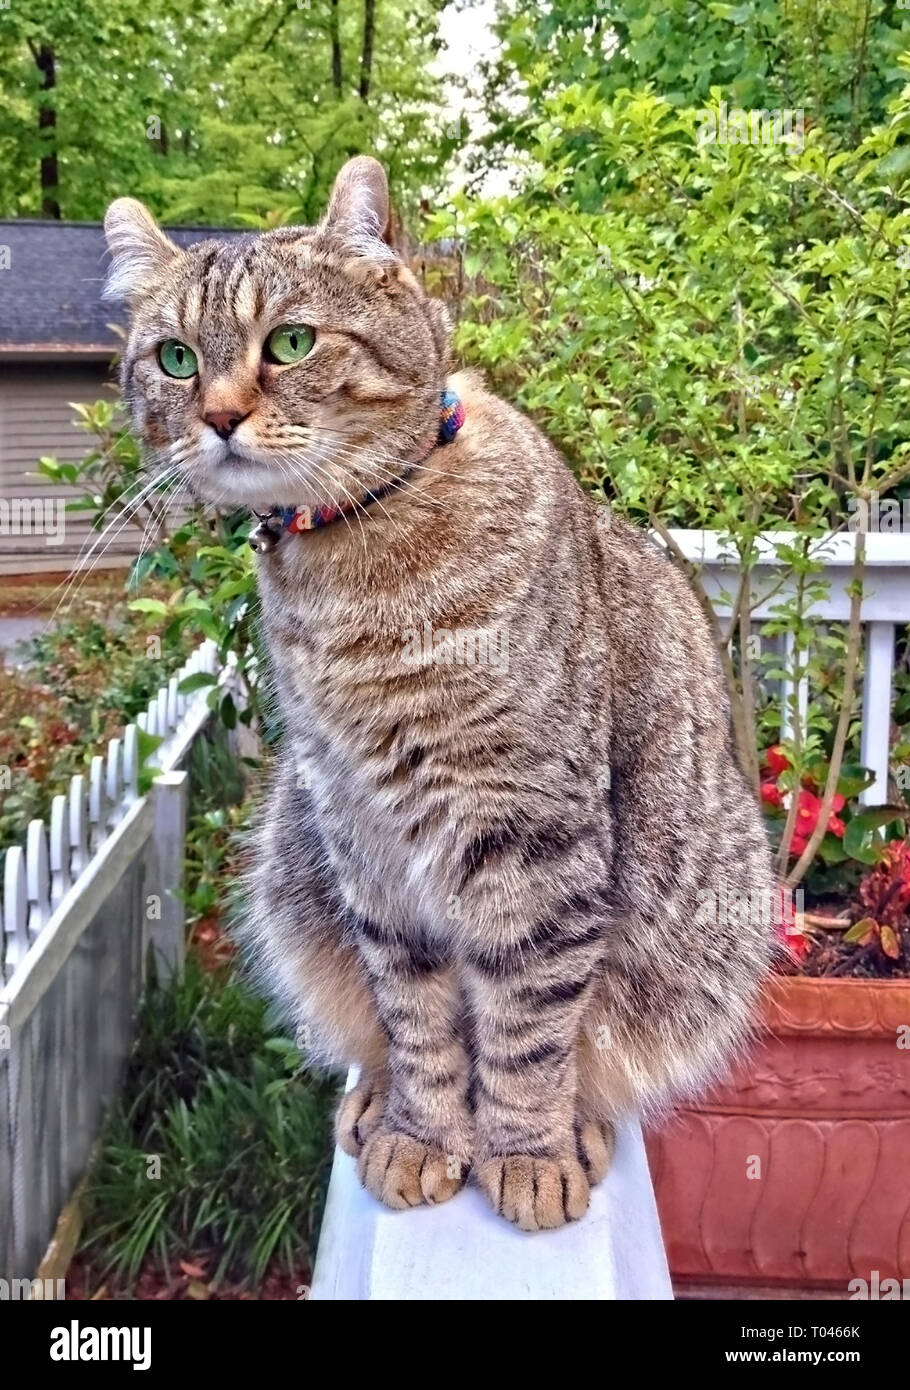 Highland Lynx tabby cat on a porch looking around. Stock Photo